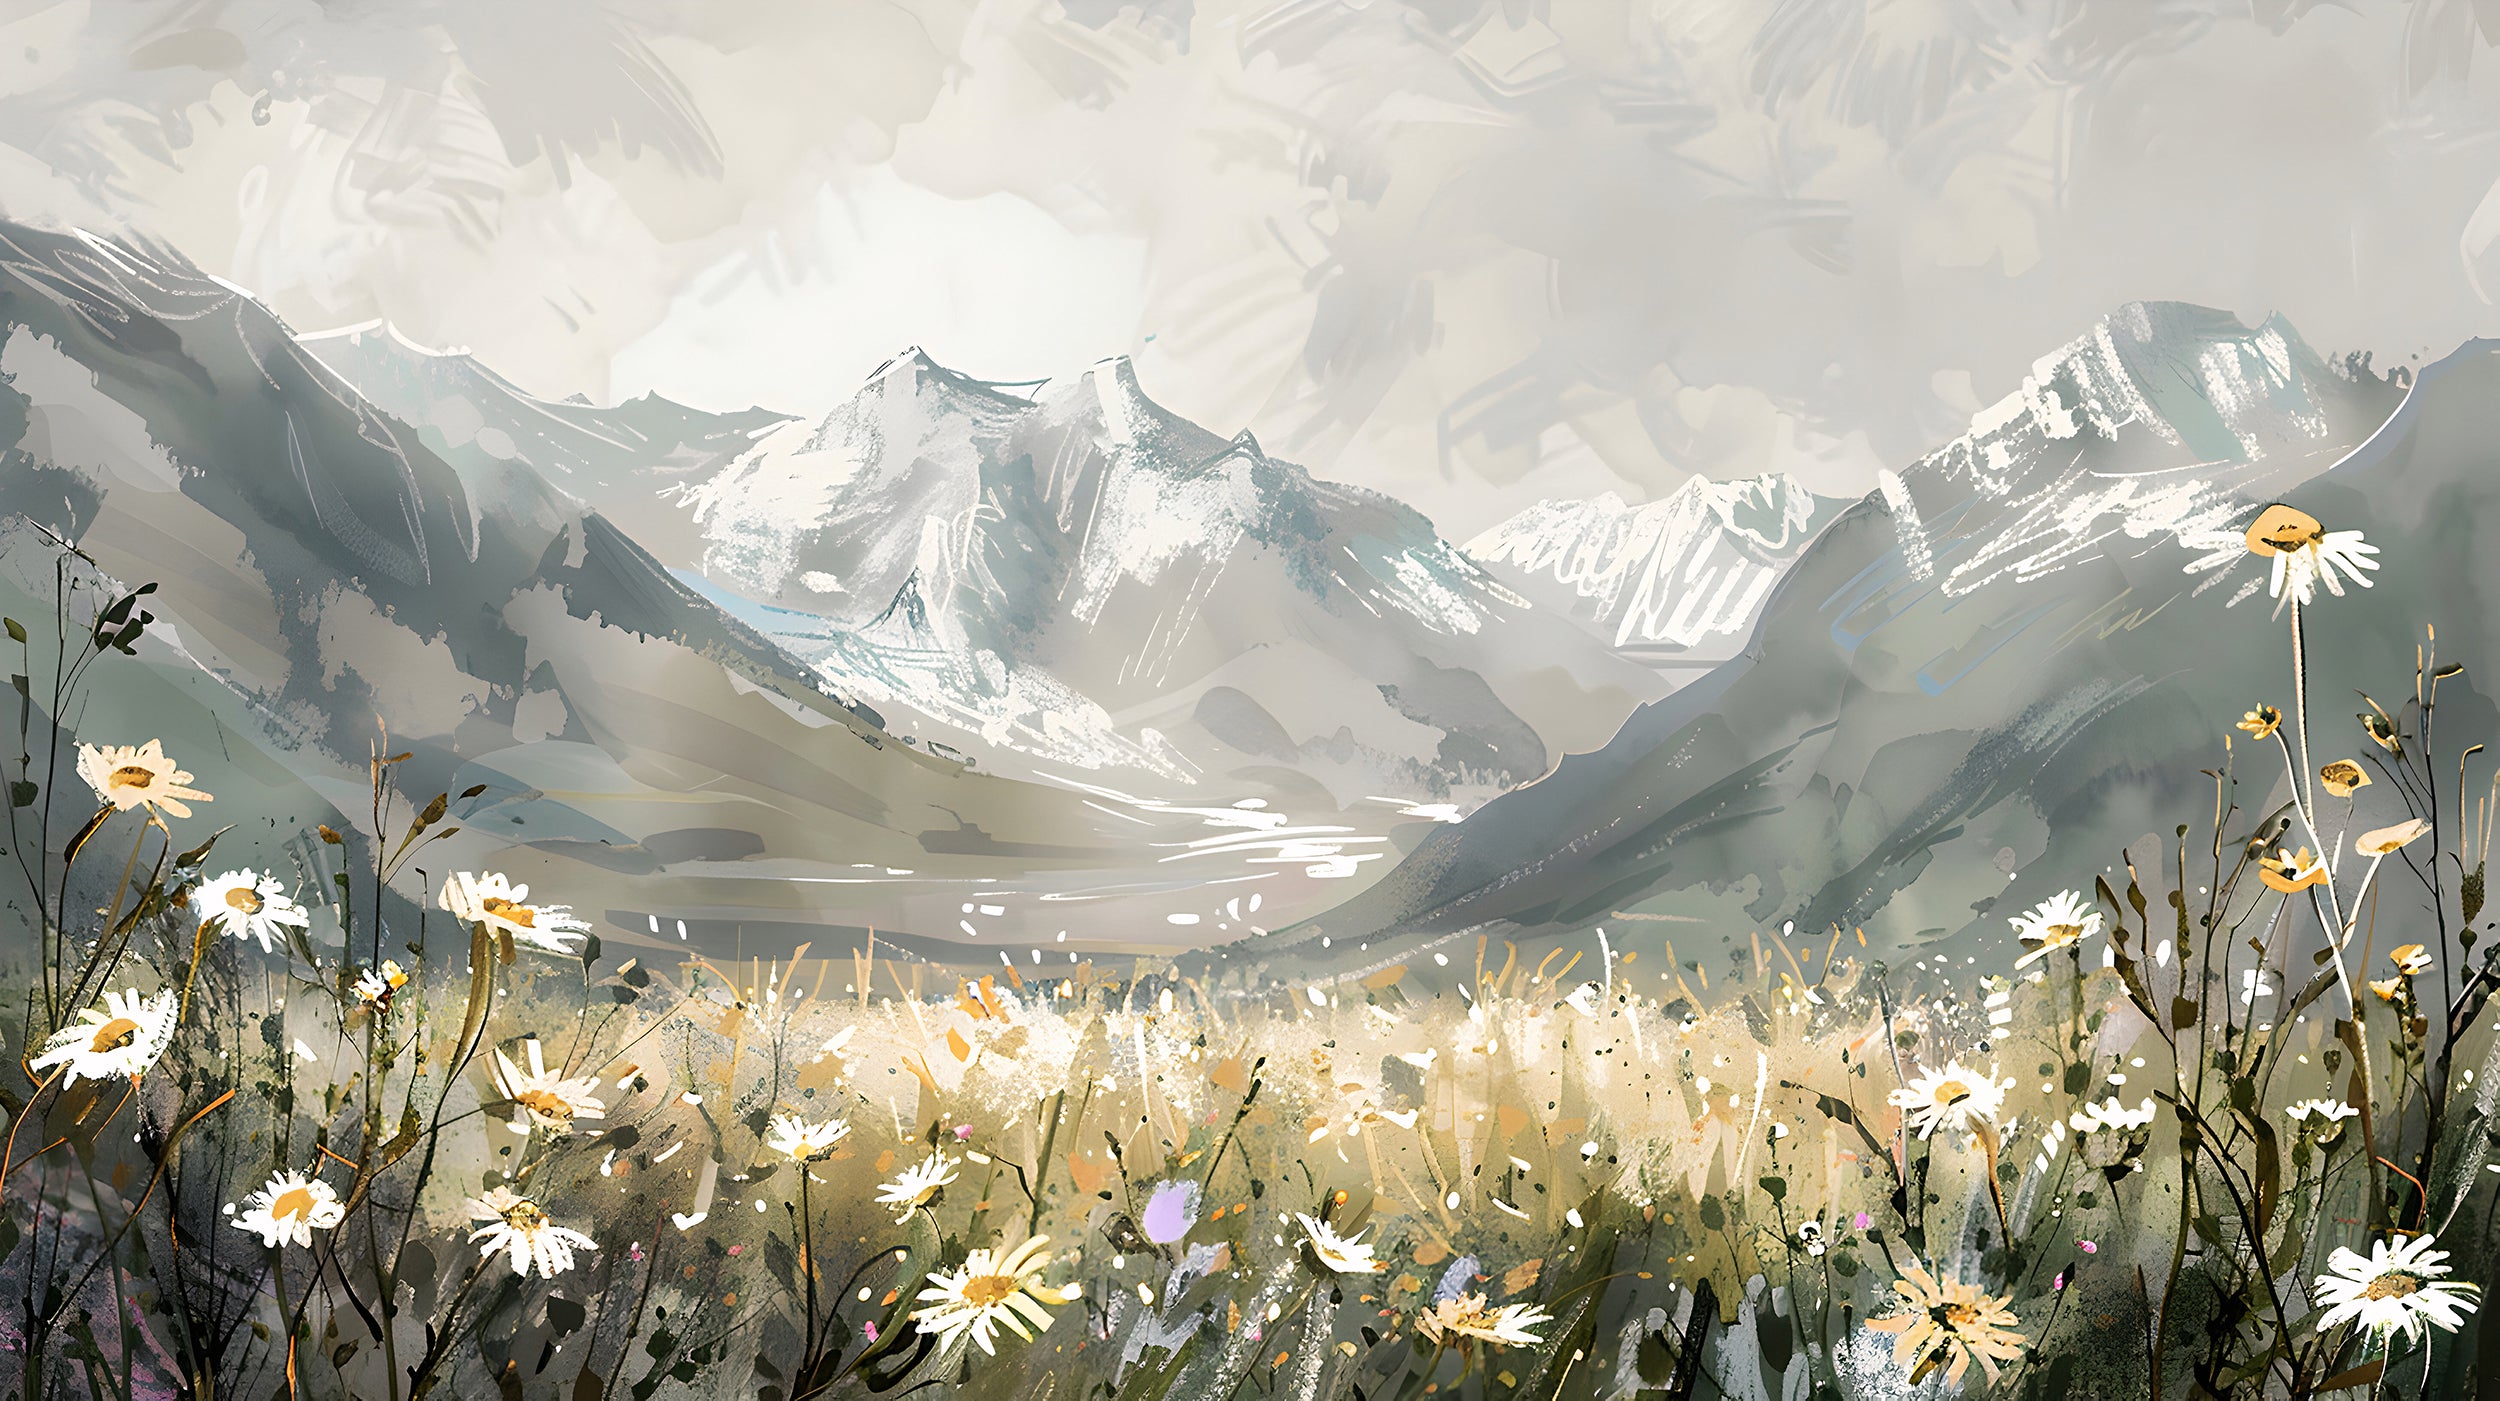 Watercolor Mountain Field Mural, Meadow Flowers in Natural Colors Wallpaper, Peel and Stick Wild Nature Landscape Mural, Grey Mountains Decal